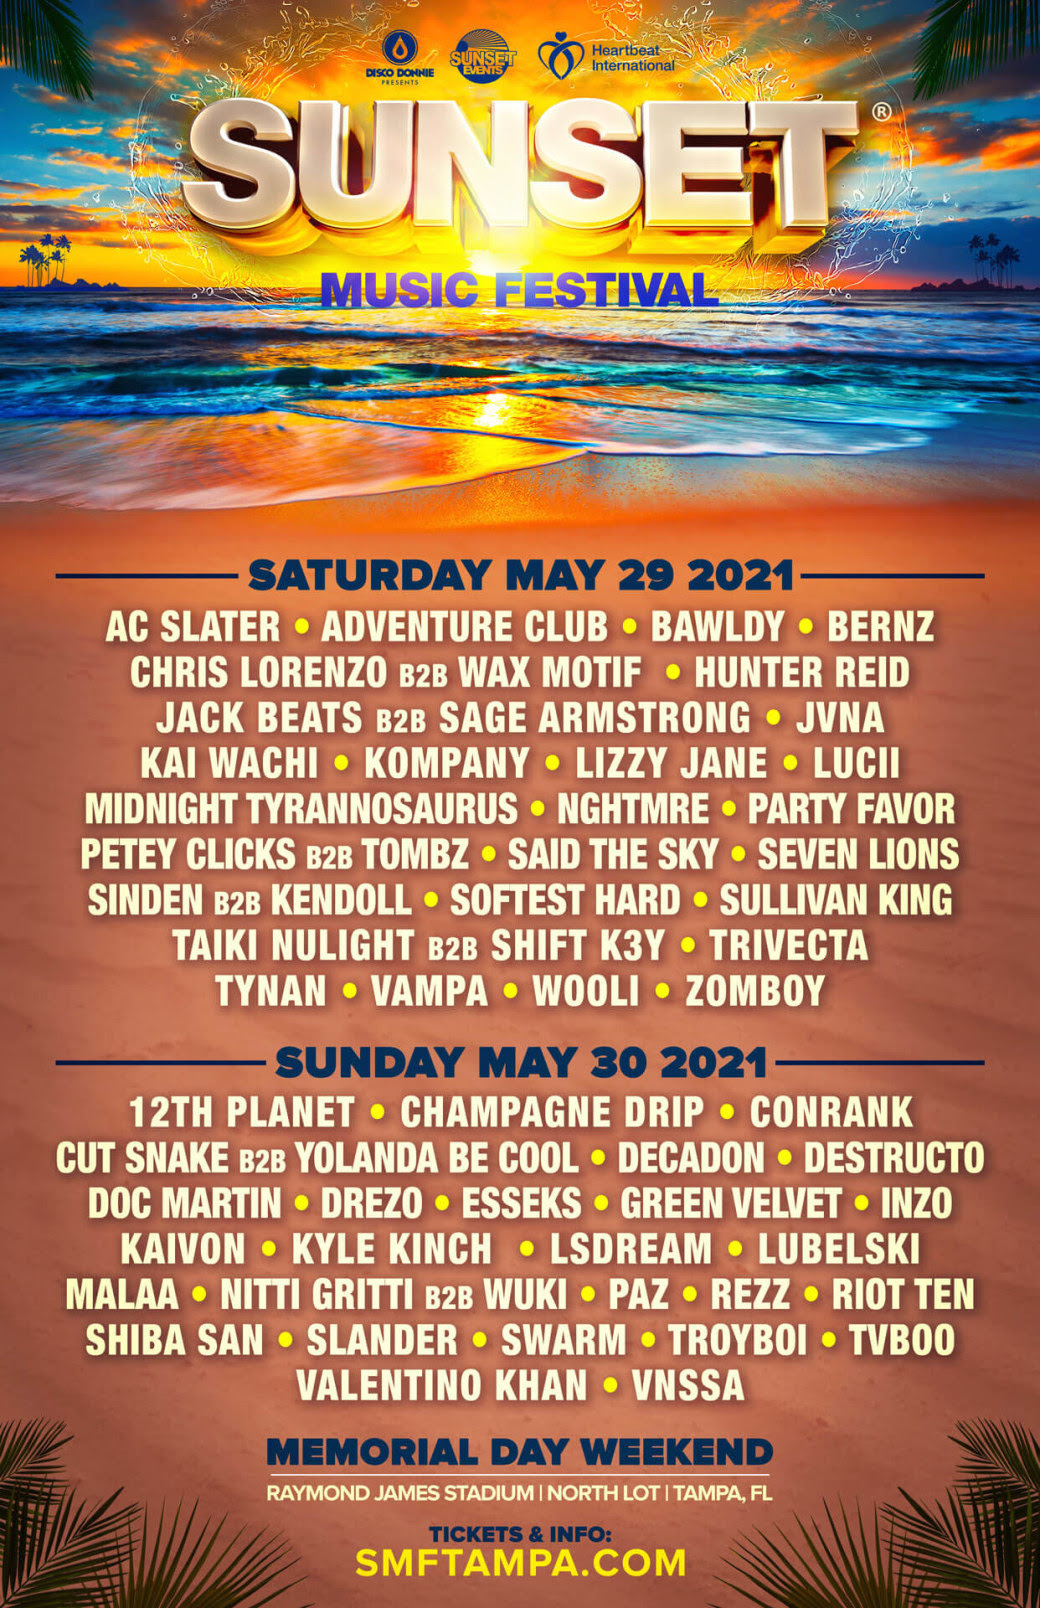 Sunset Music Festival 2021 reveals its daily lineups - EDMunplugged